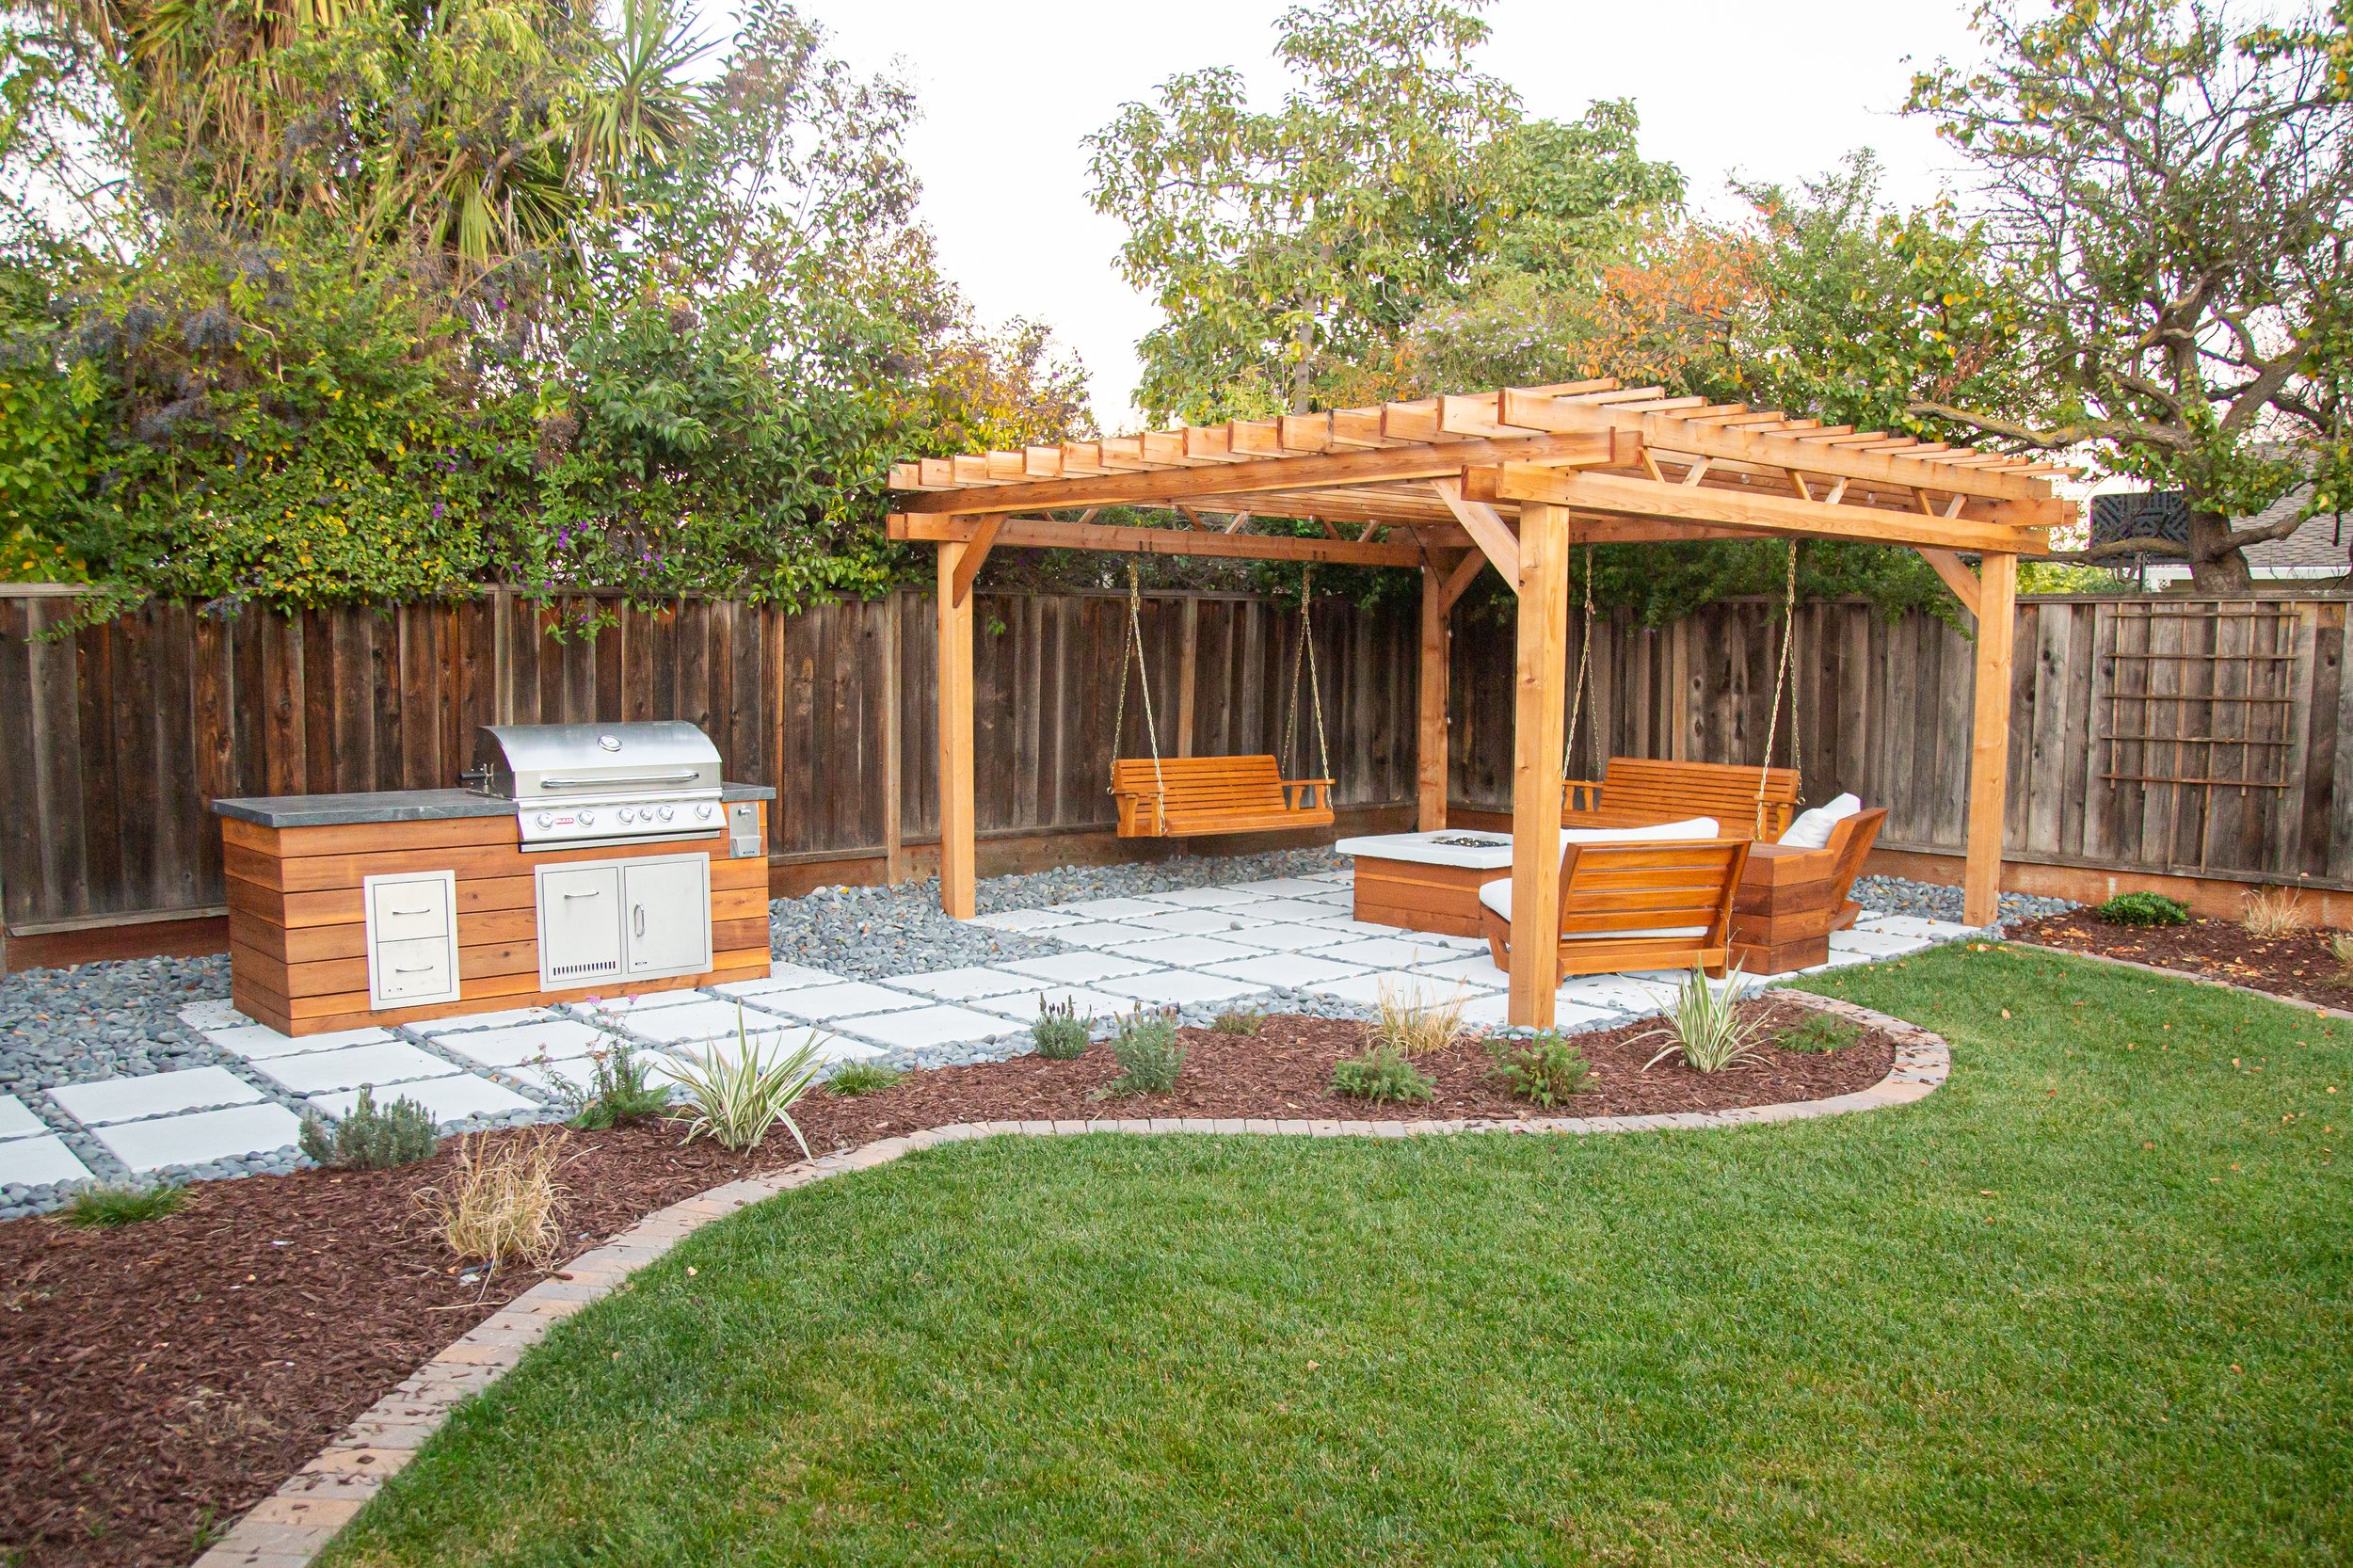 traditional wooden pergola on concrete paver patio with handing bench swings and fire pit